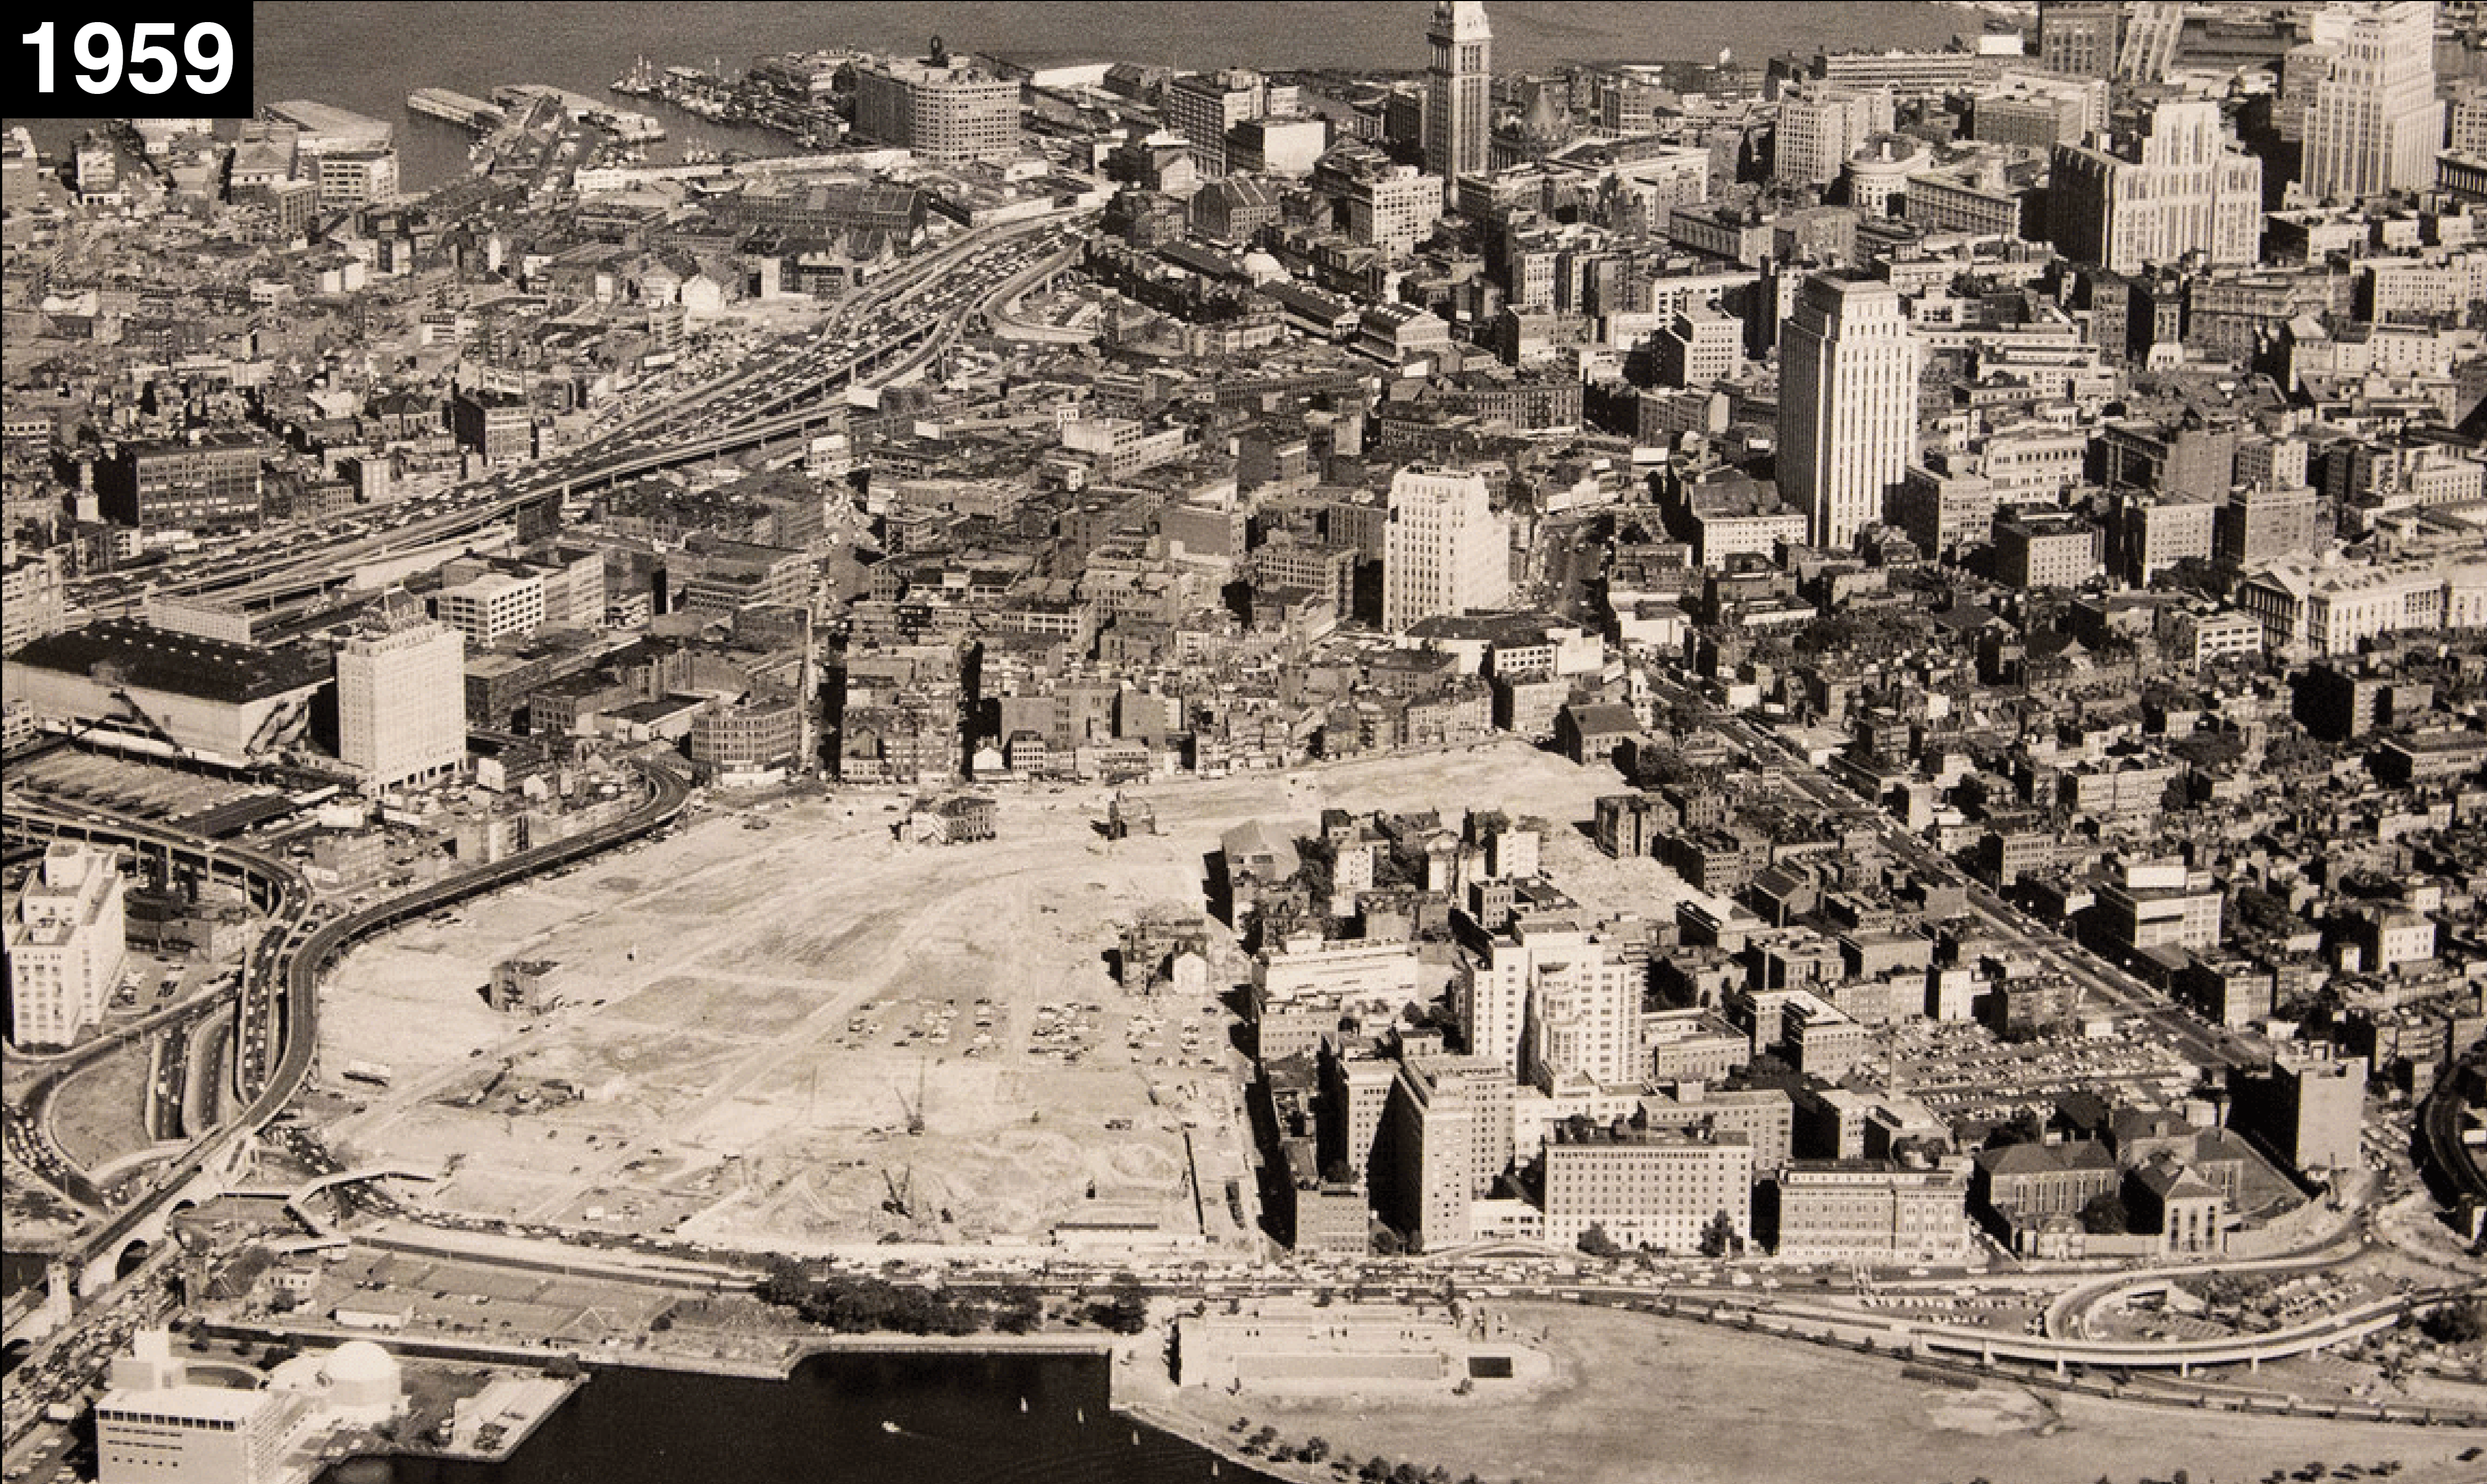 Boston West End 1959 after demolition - ugly side of Boston